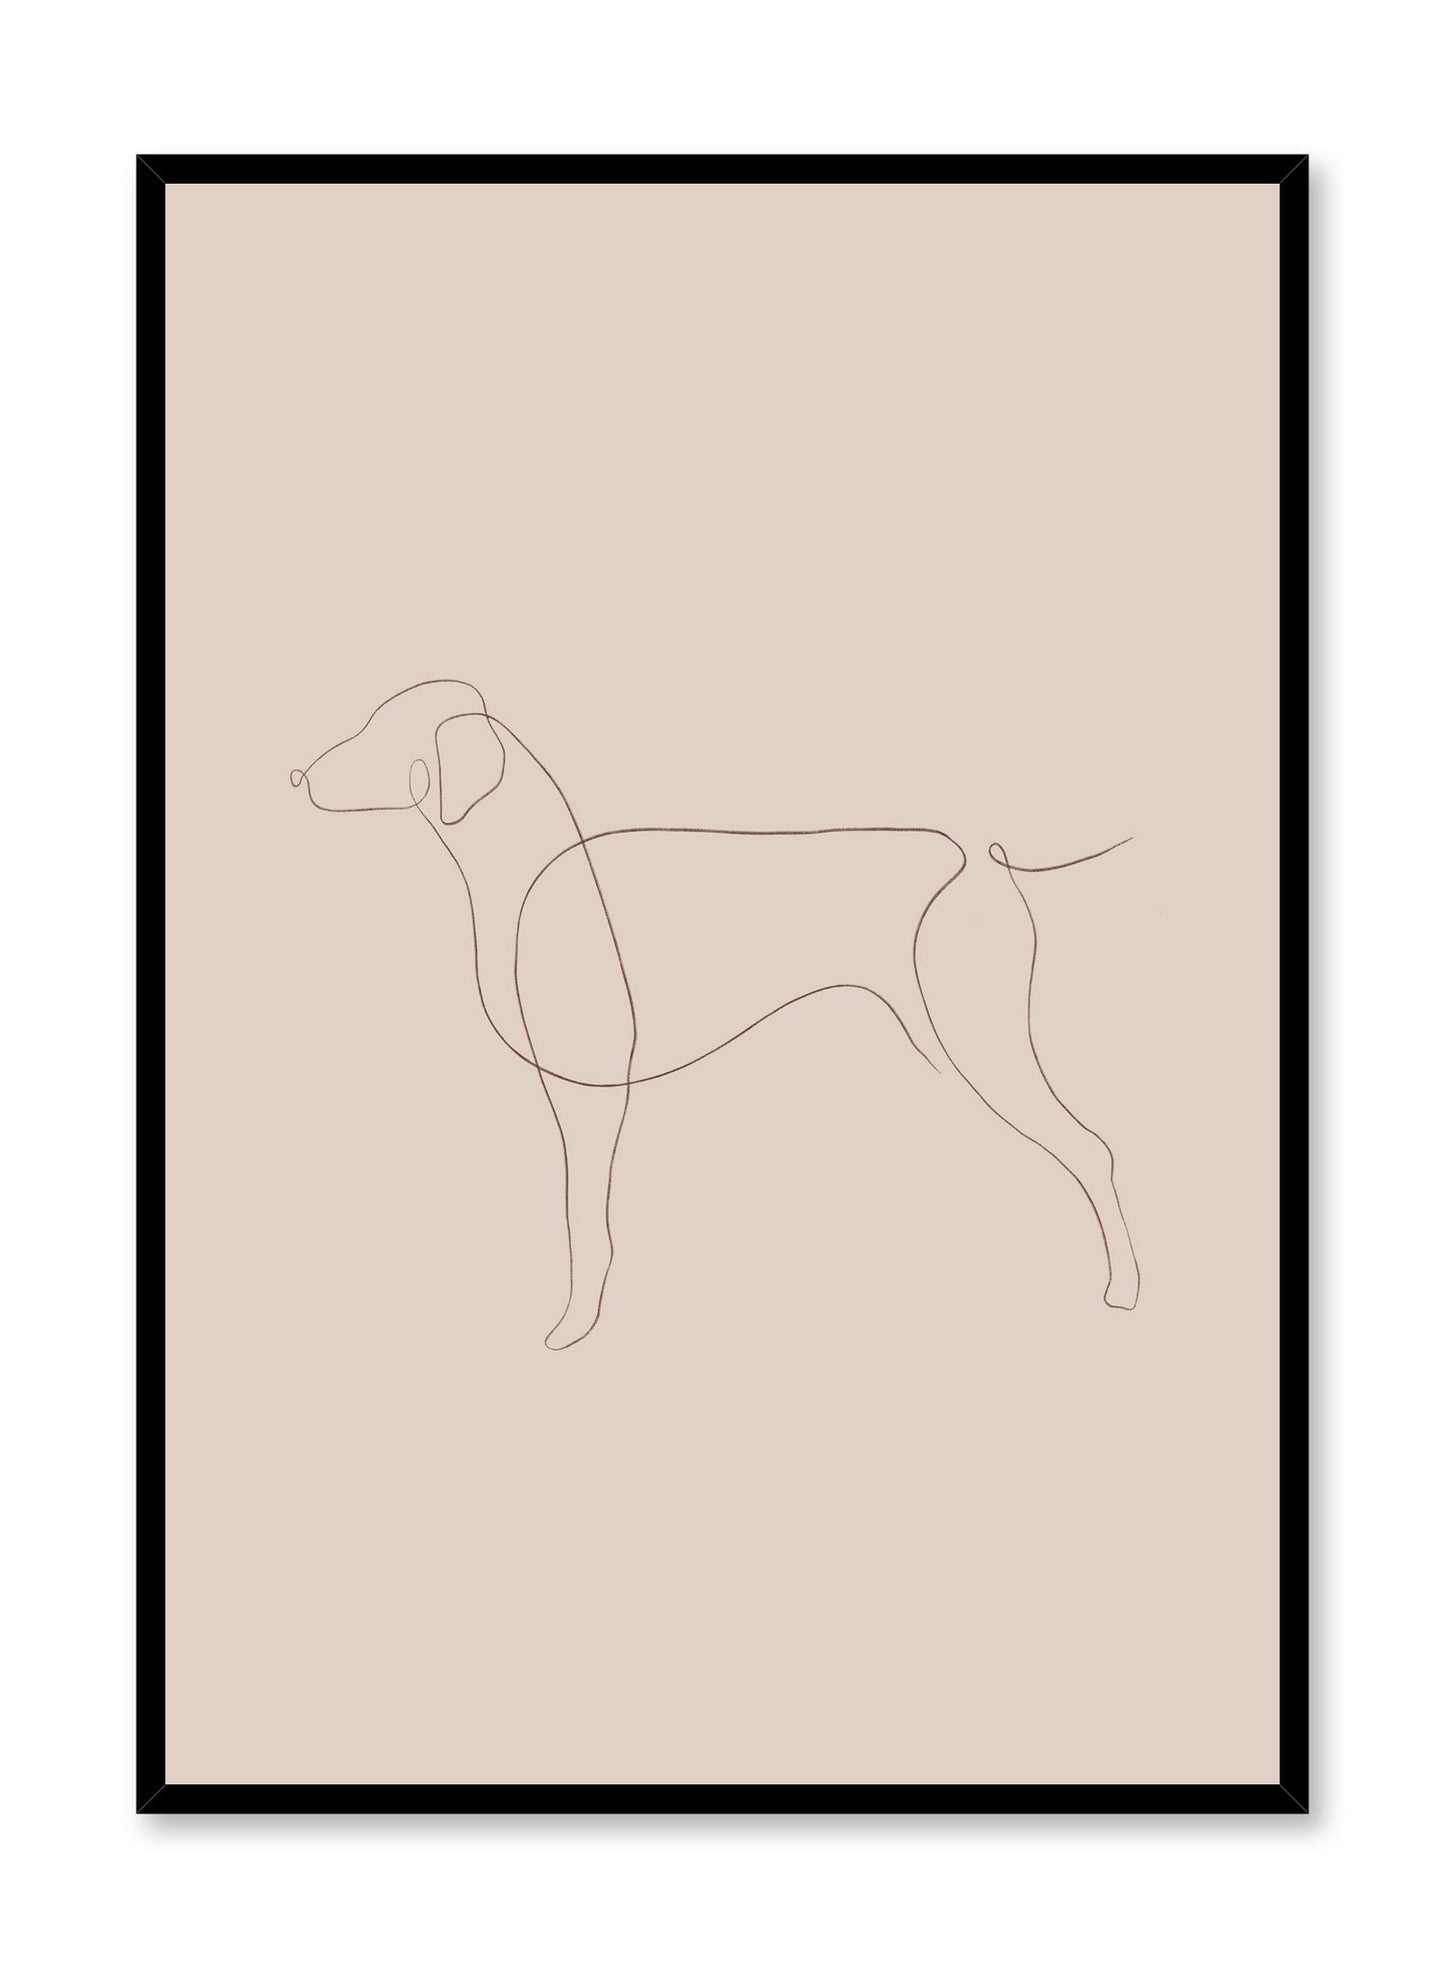 Modern minimalist poster by Opposite Wall with abstract illustration of dog line art with beige background